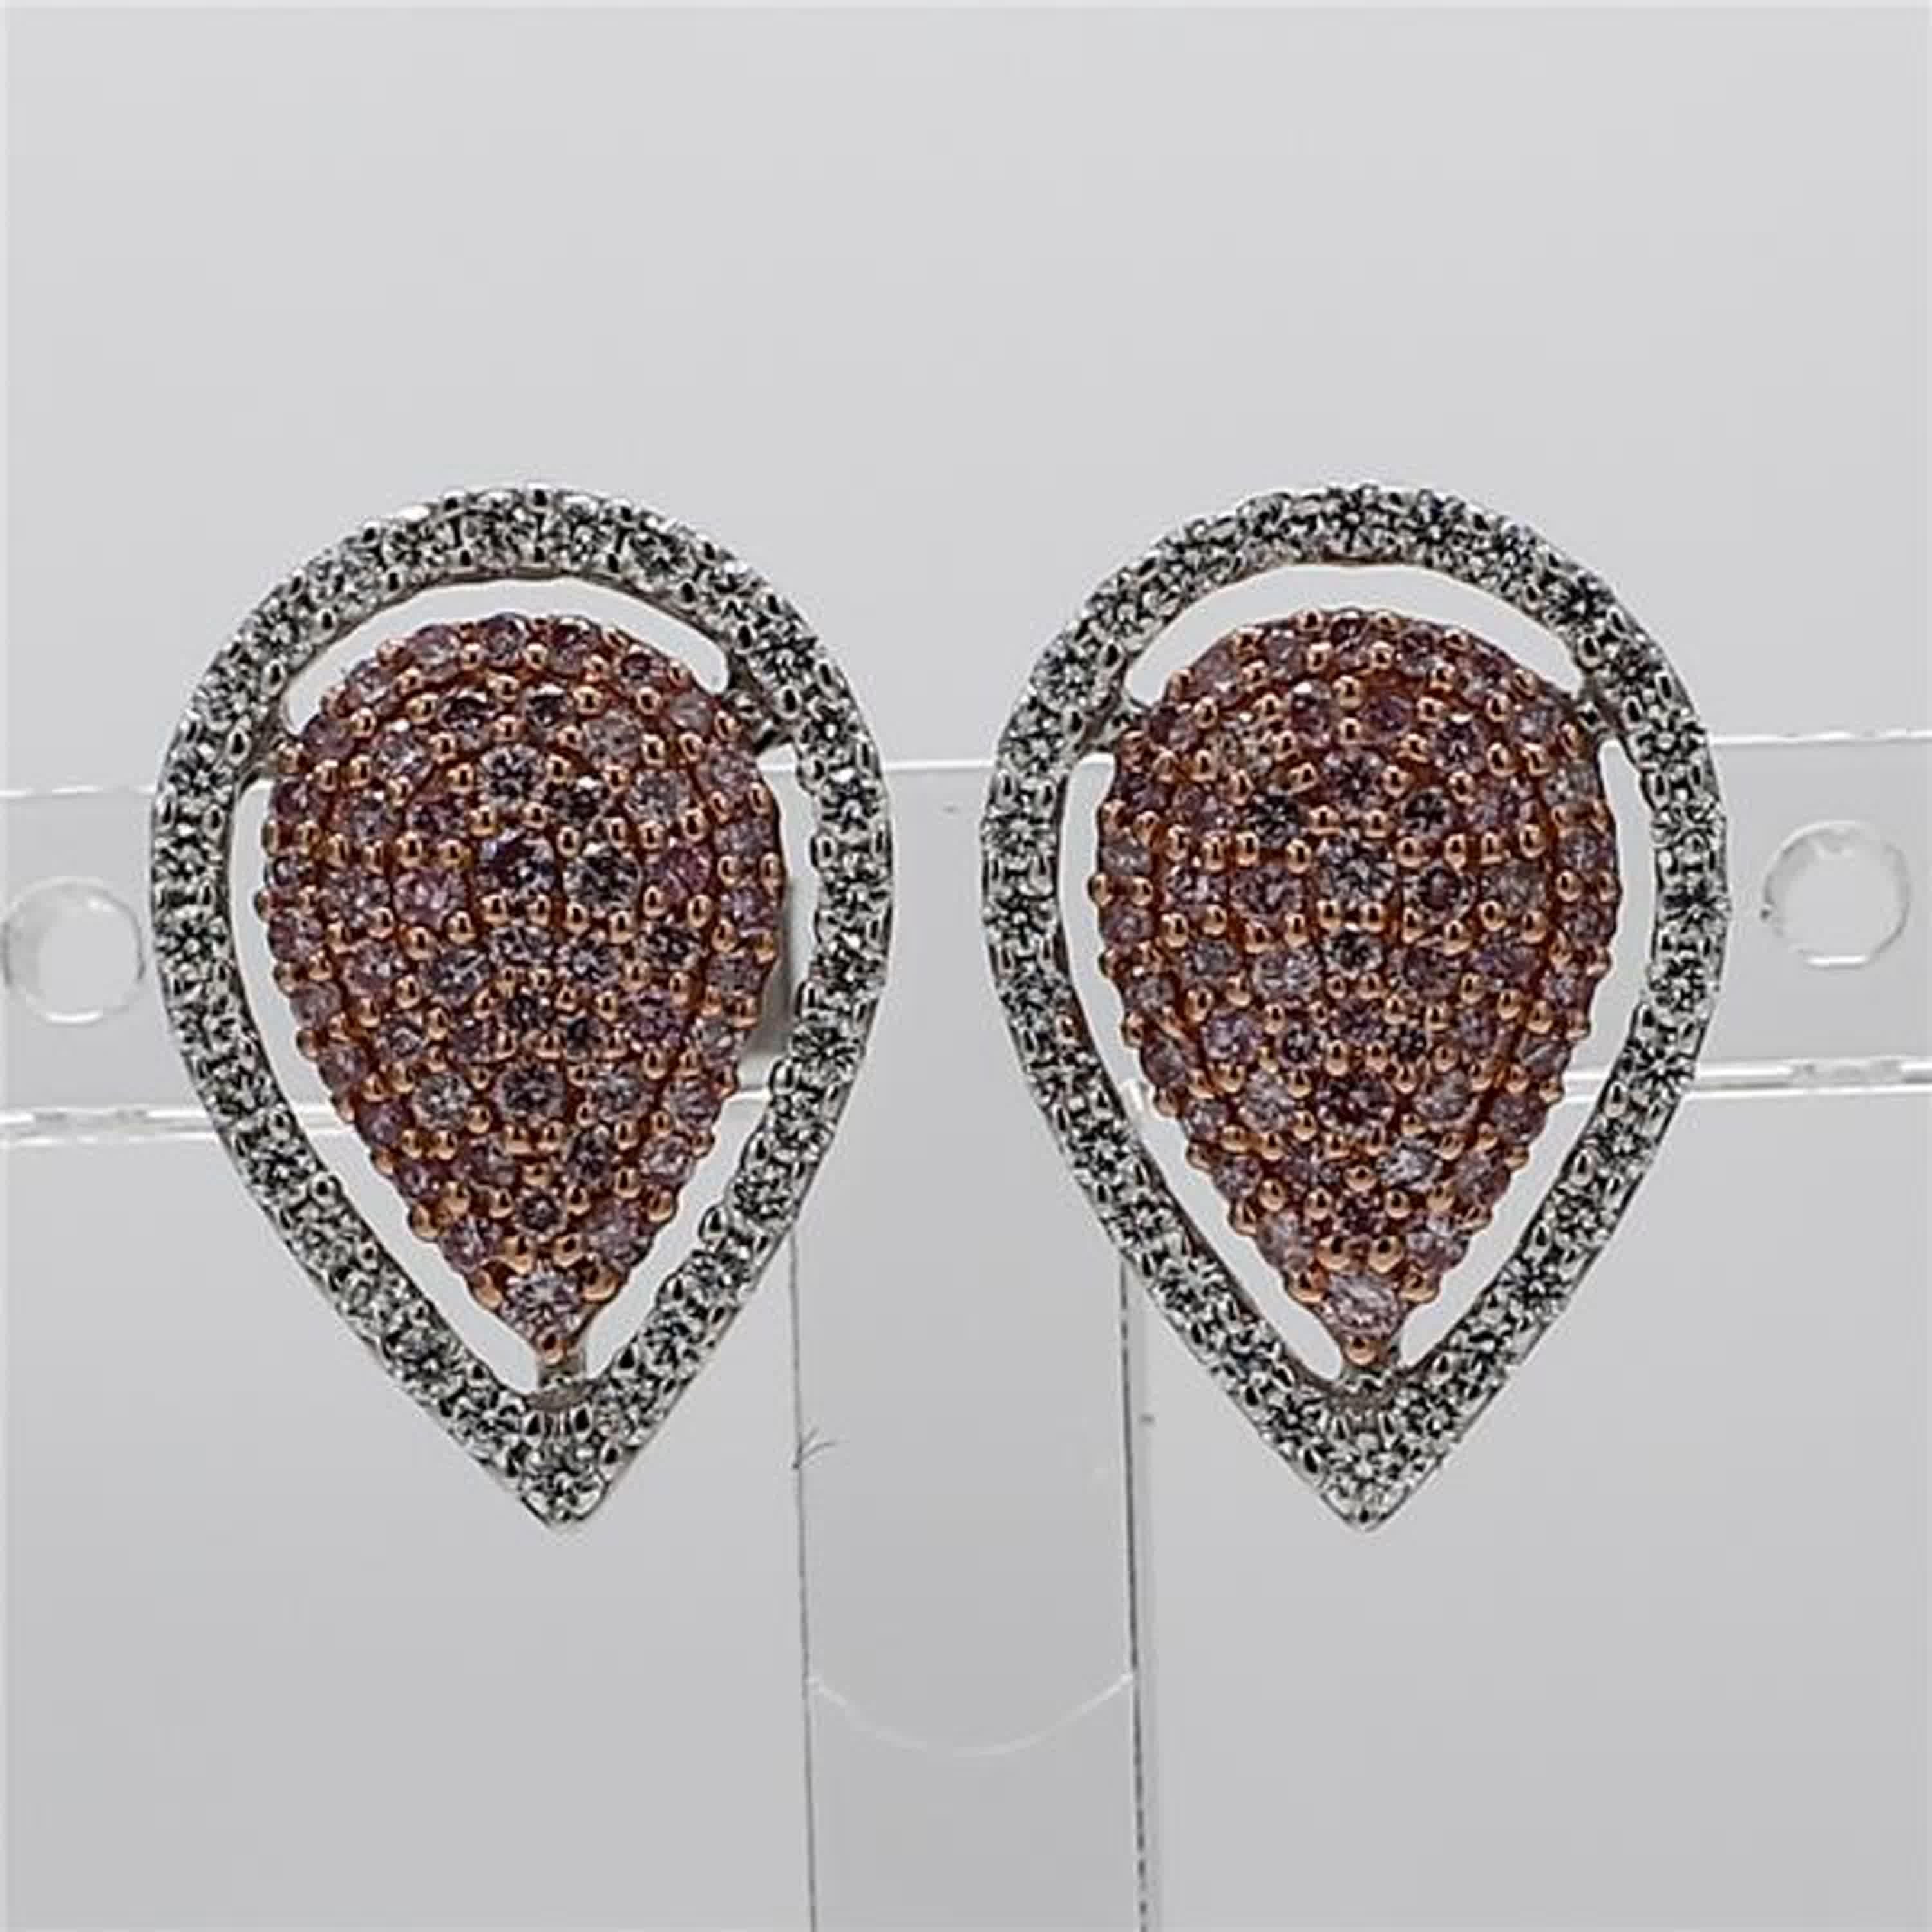 RareGemWorld's classic diamond earrings. Mounted in a beautiful 18K Rose and White Gold setting with natural round cut pink diamond melee complimented by small round natural white diamond melee in a beautiful pear shape. These earrings are